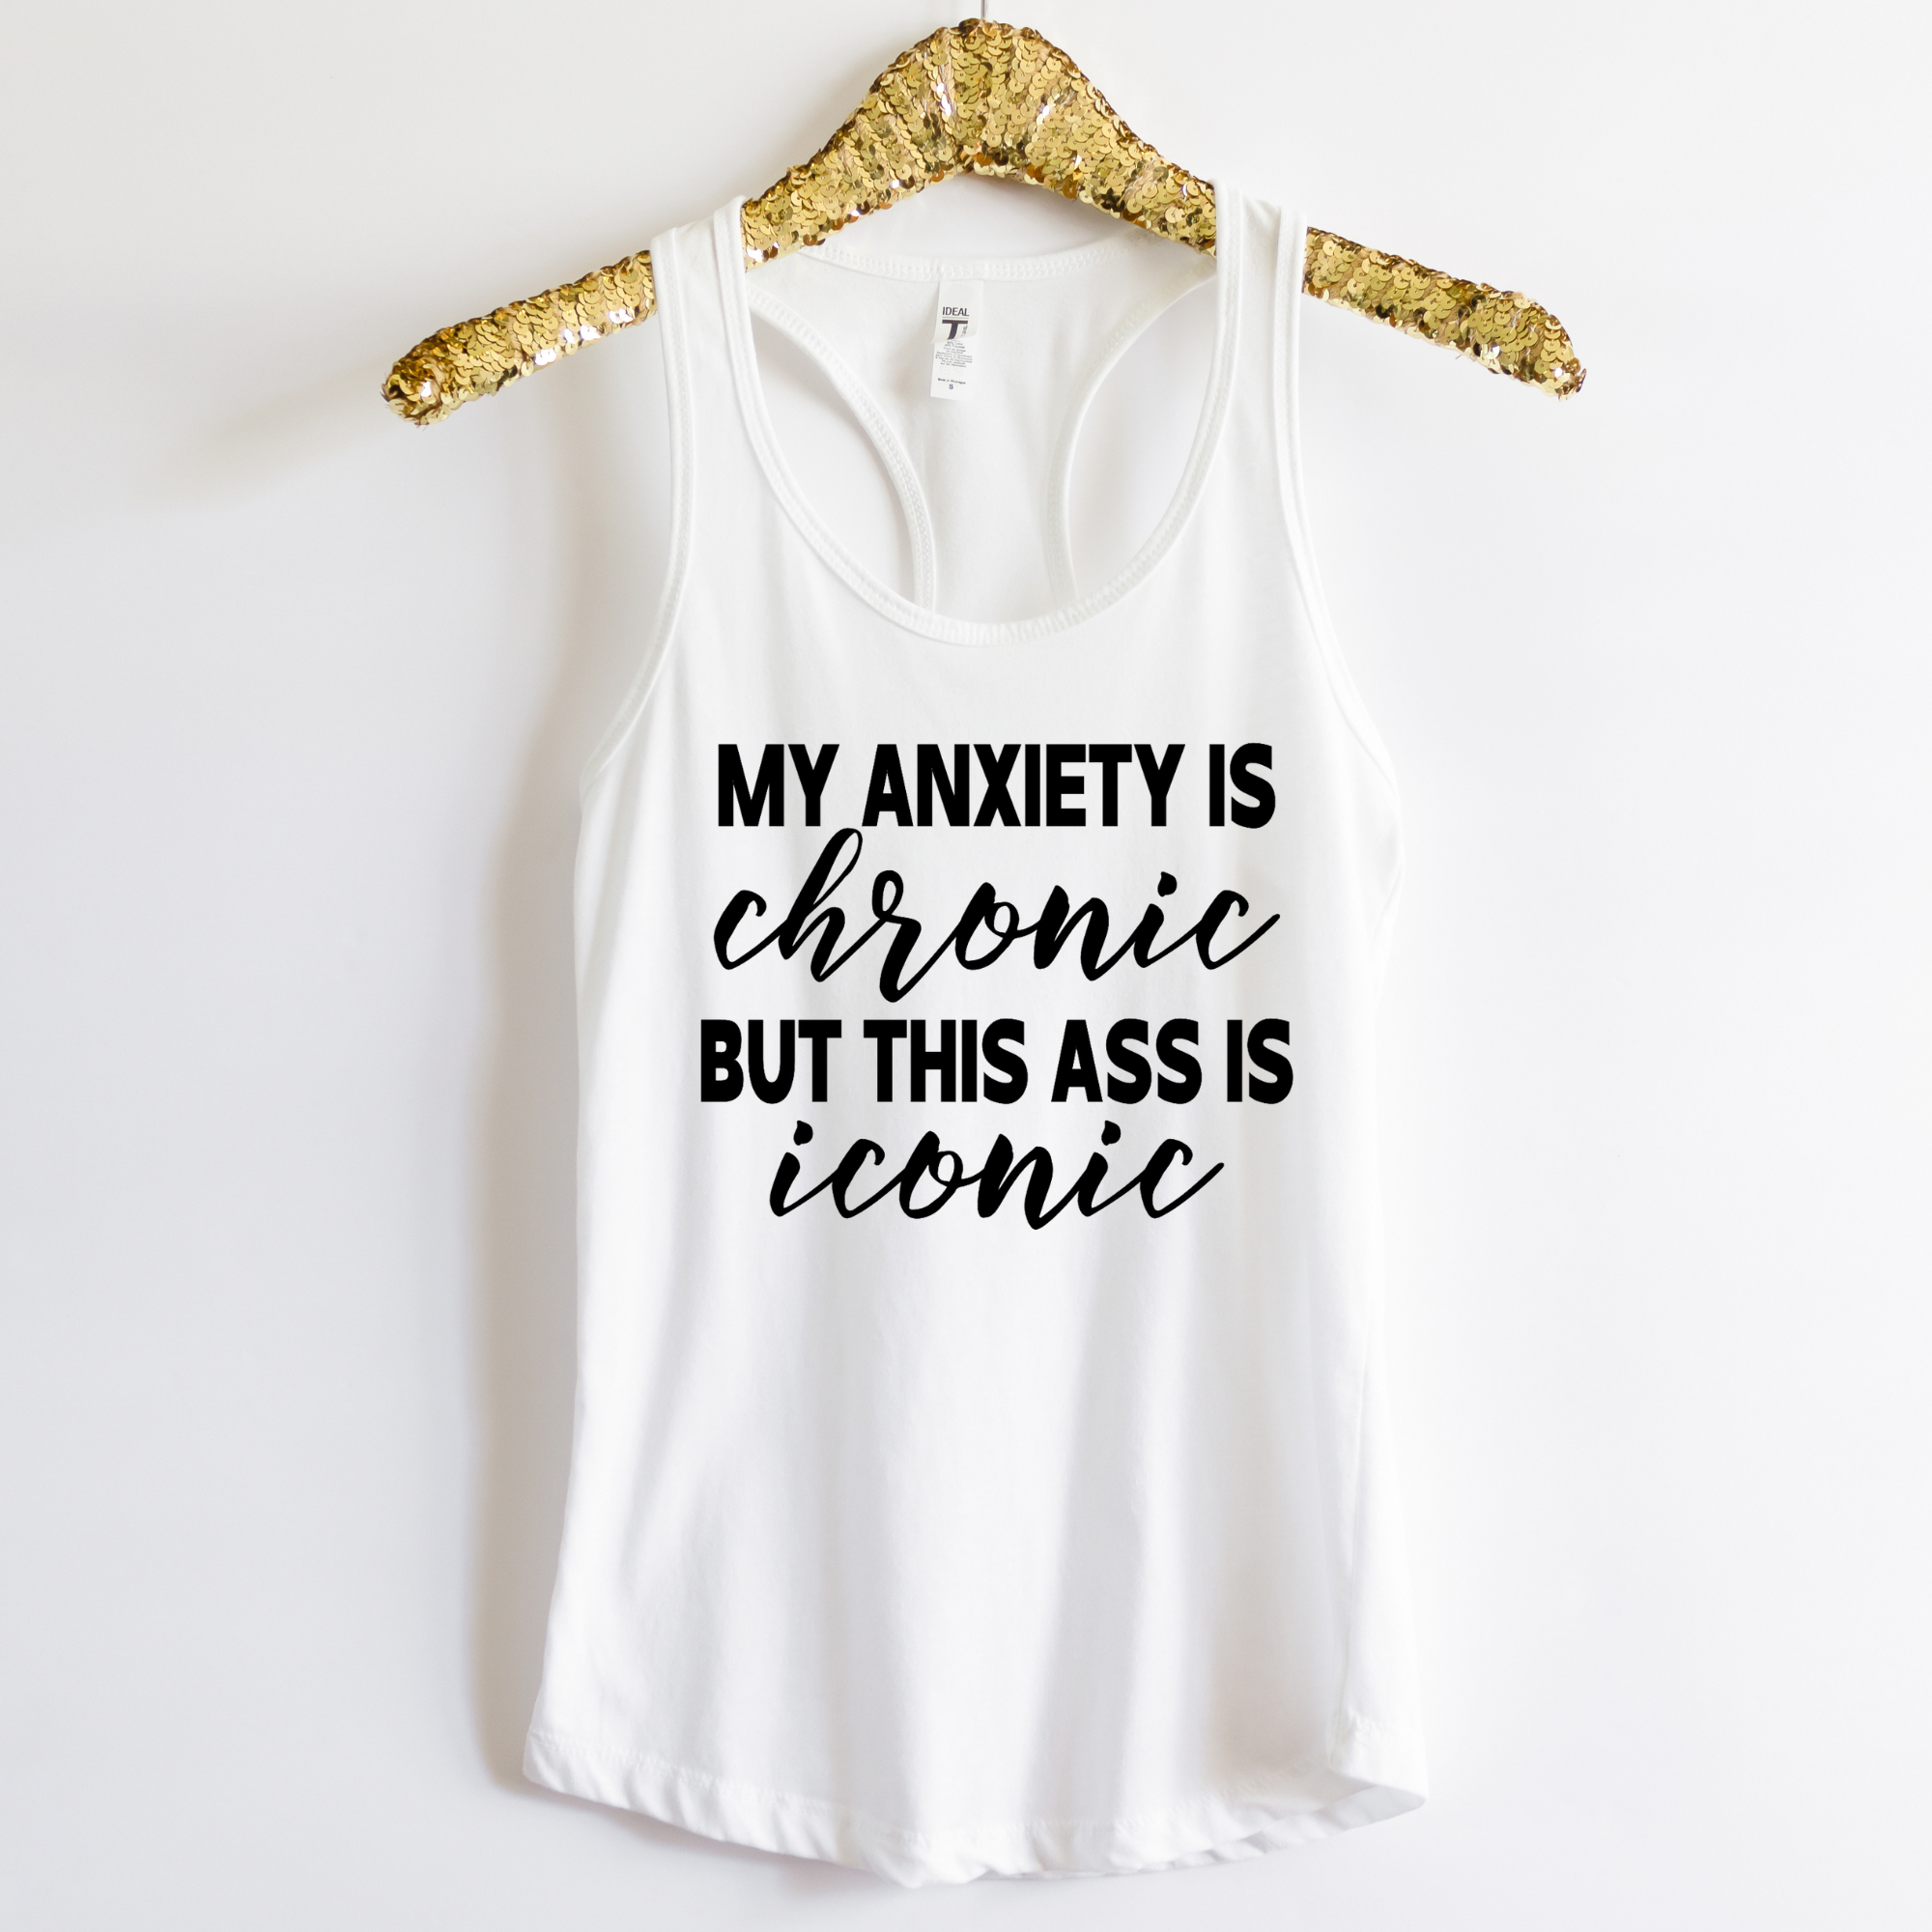 My Anxiety is Chronic But this Ass is Iconic Shirt